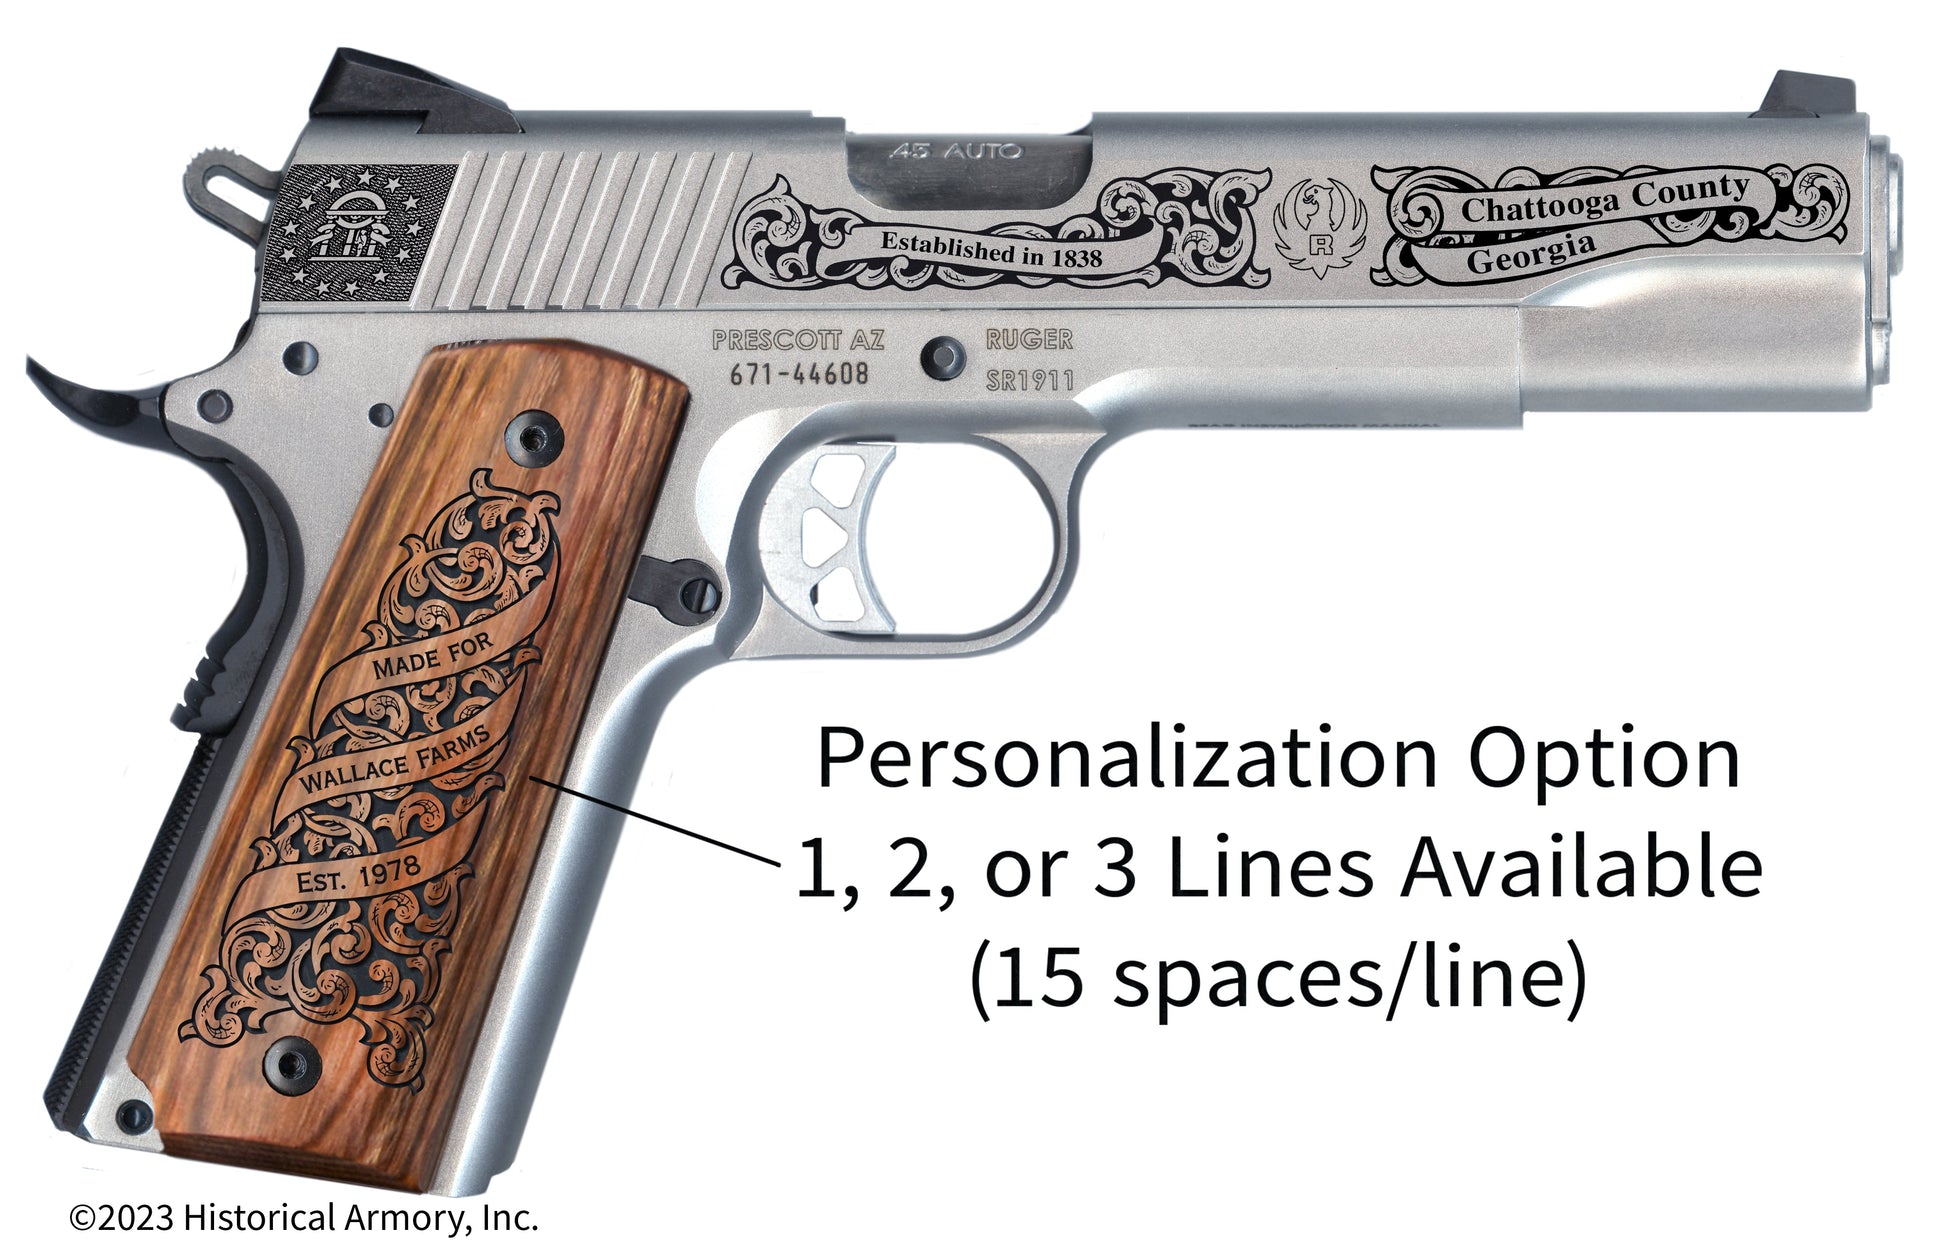 Chattooga County Georgia Personalized Engraved .45 Auto Ruger 1911